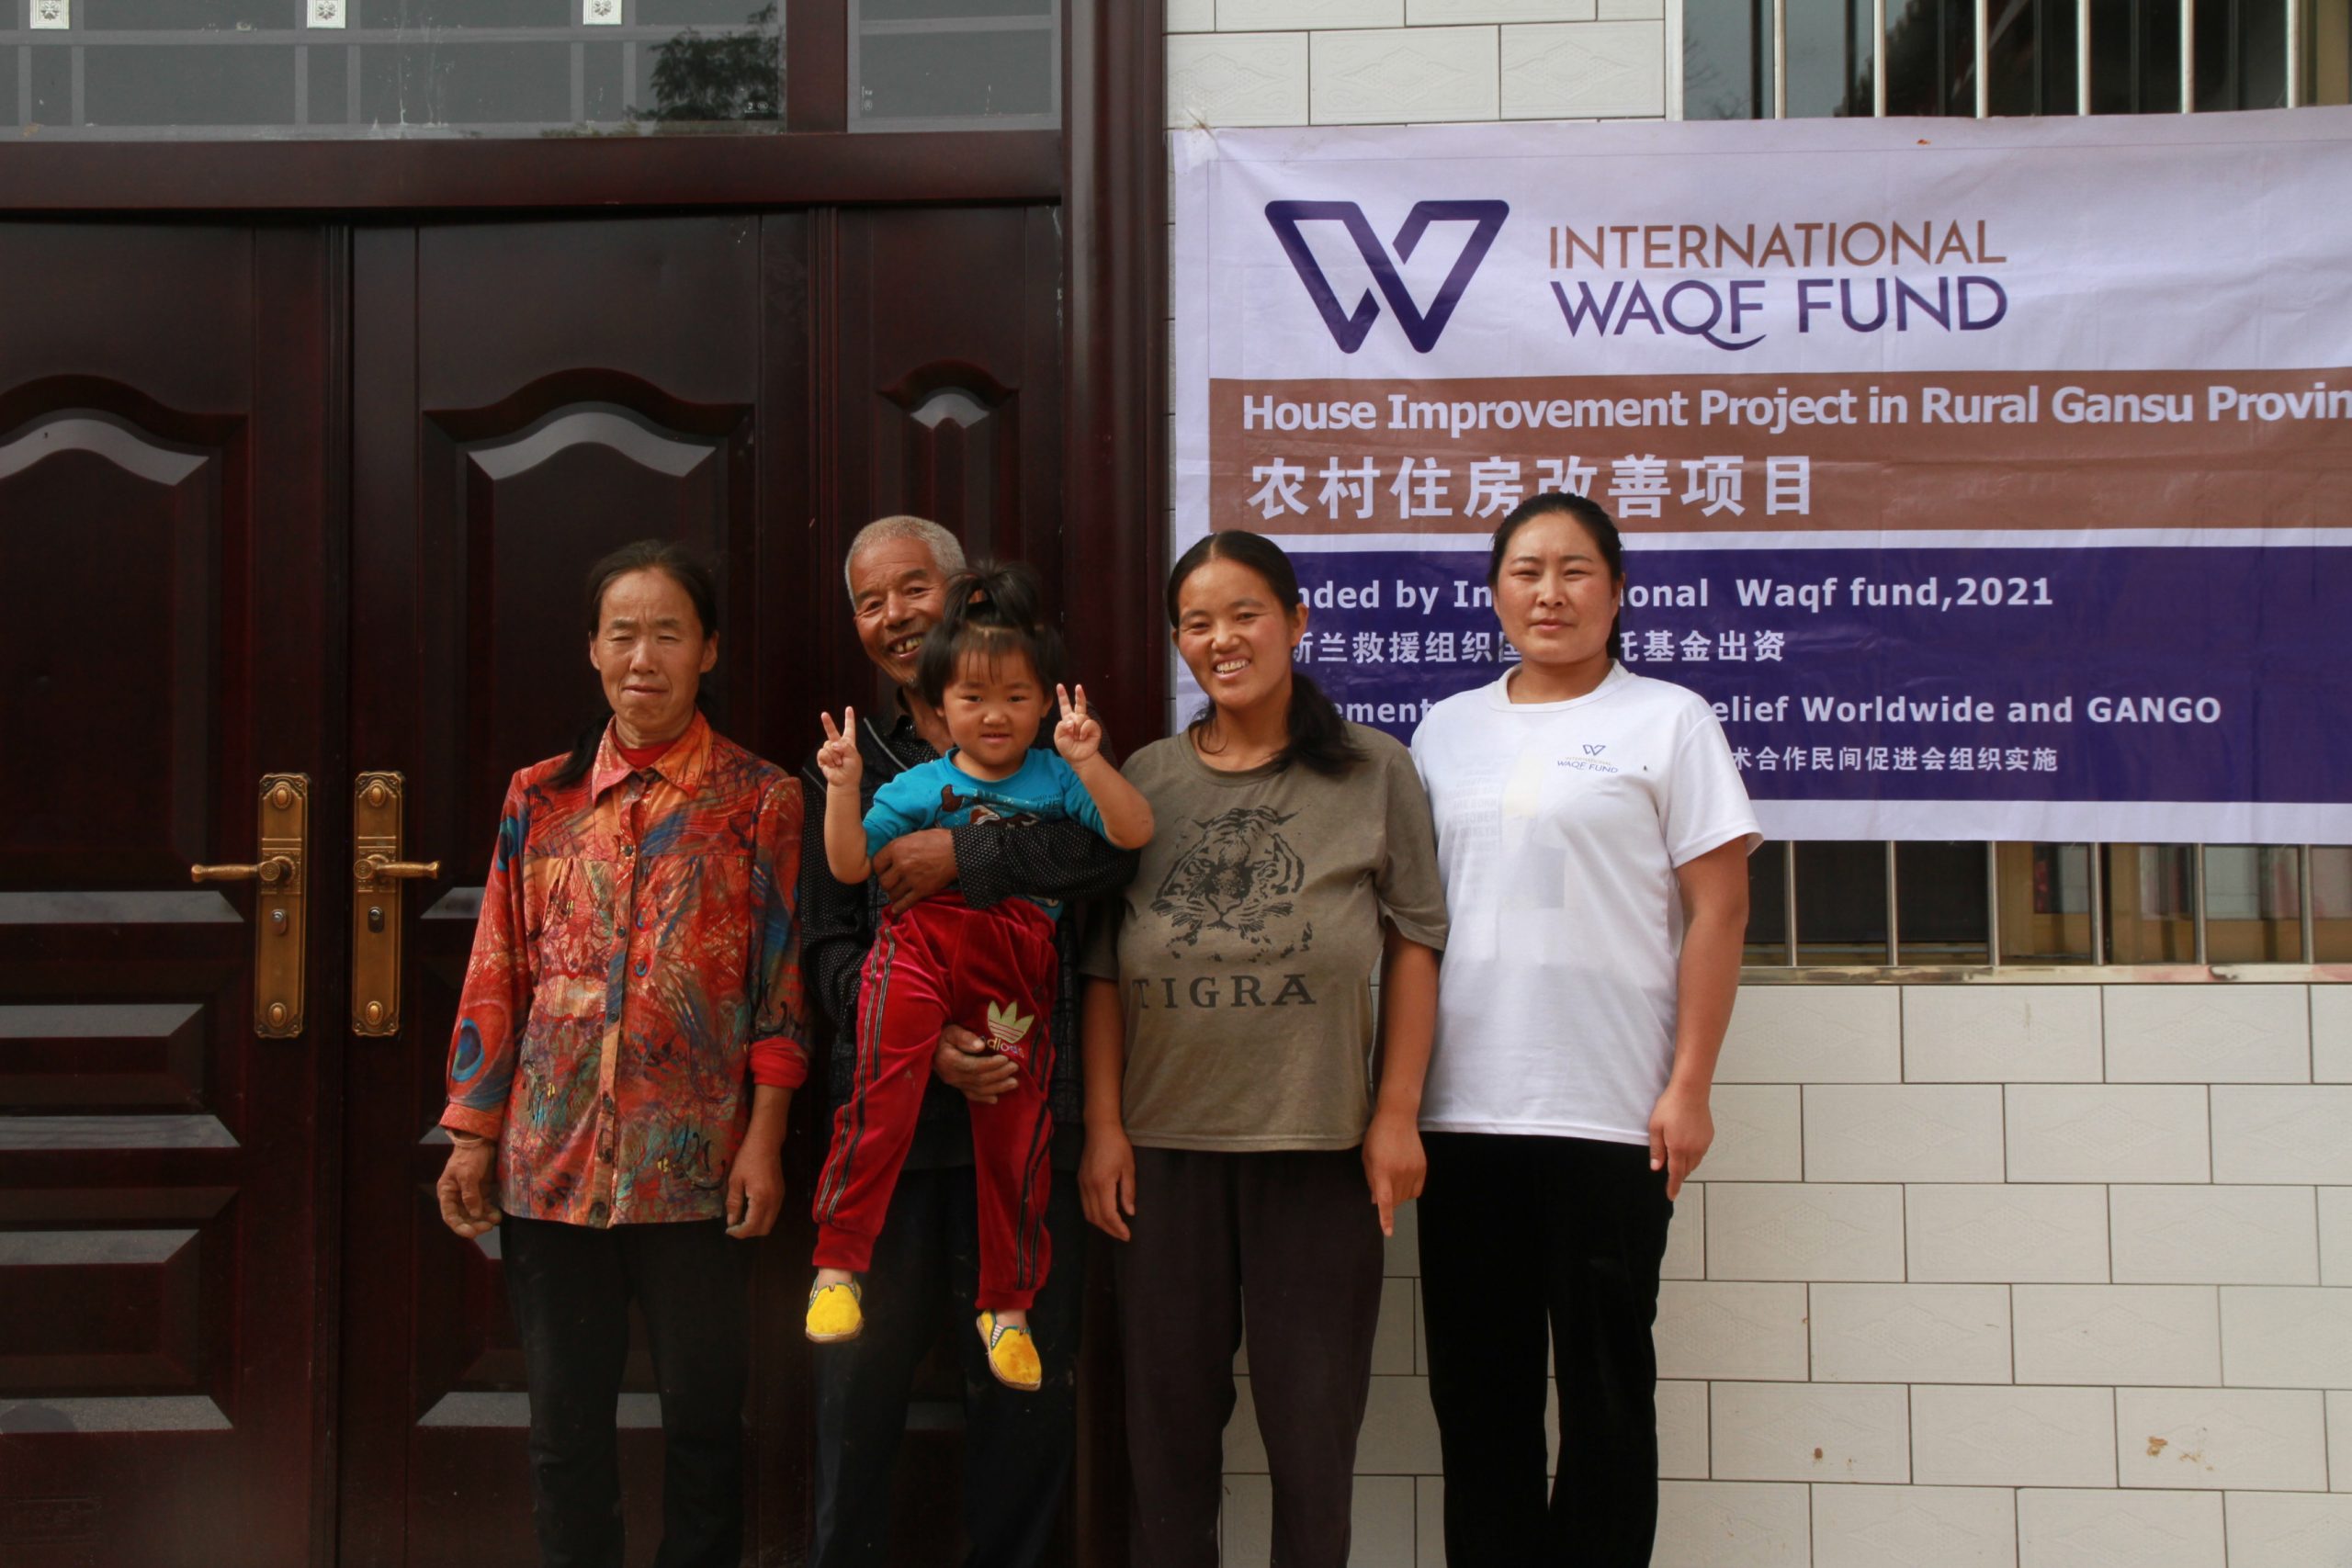 Housing Help Families - Waqf personal fundraising website